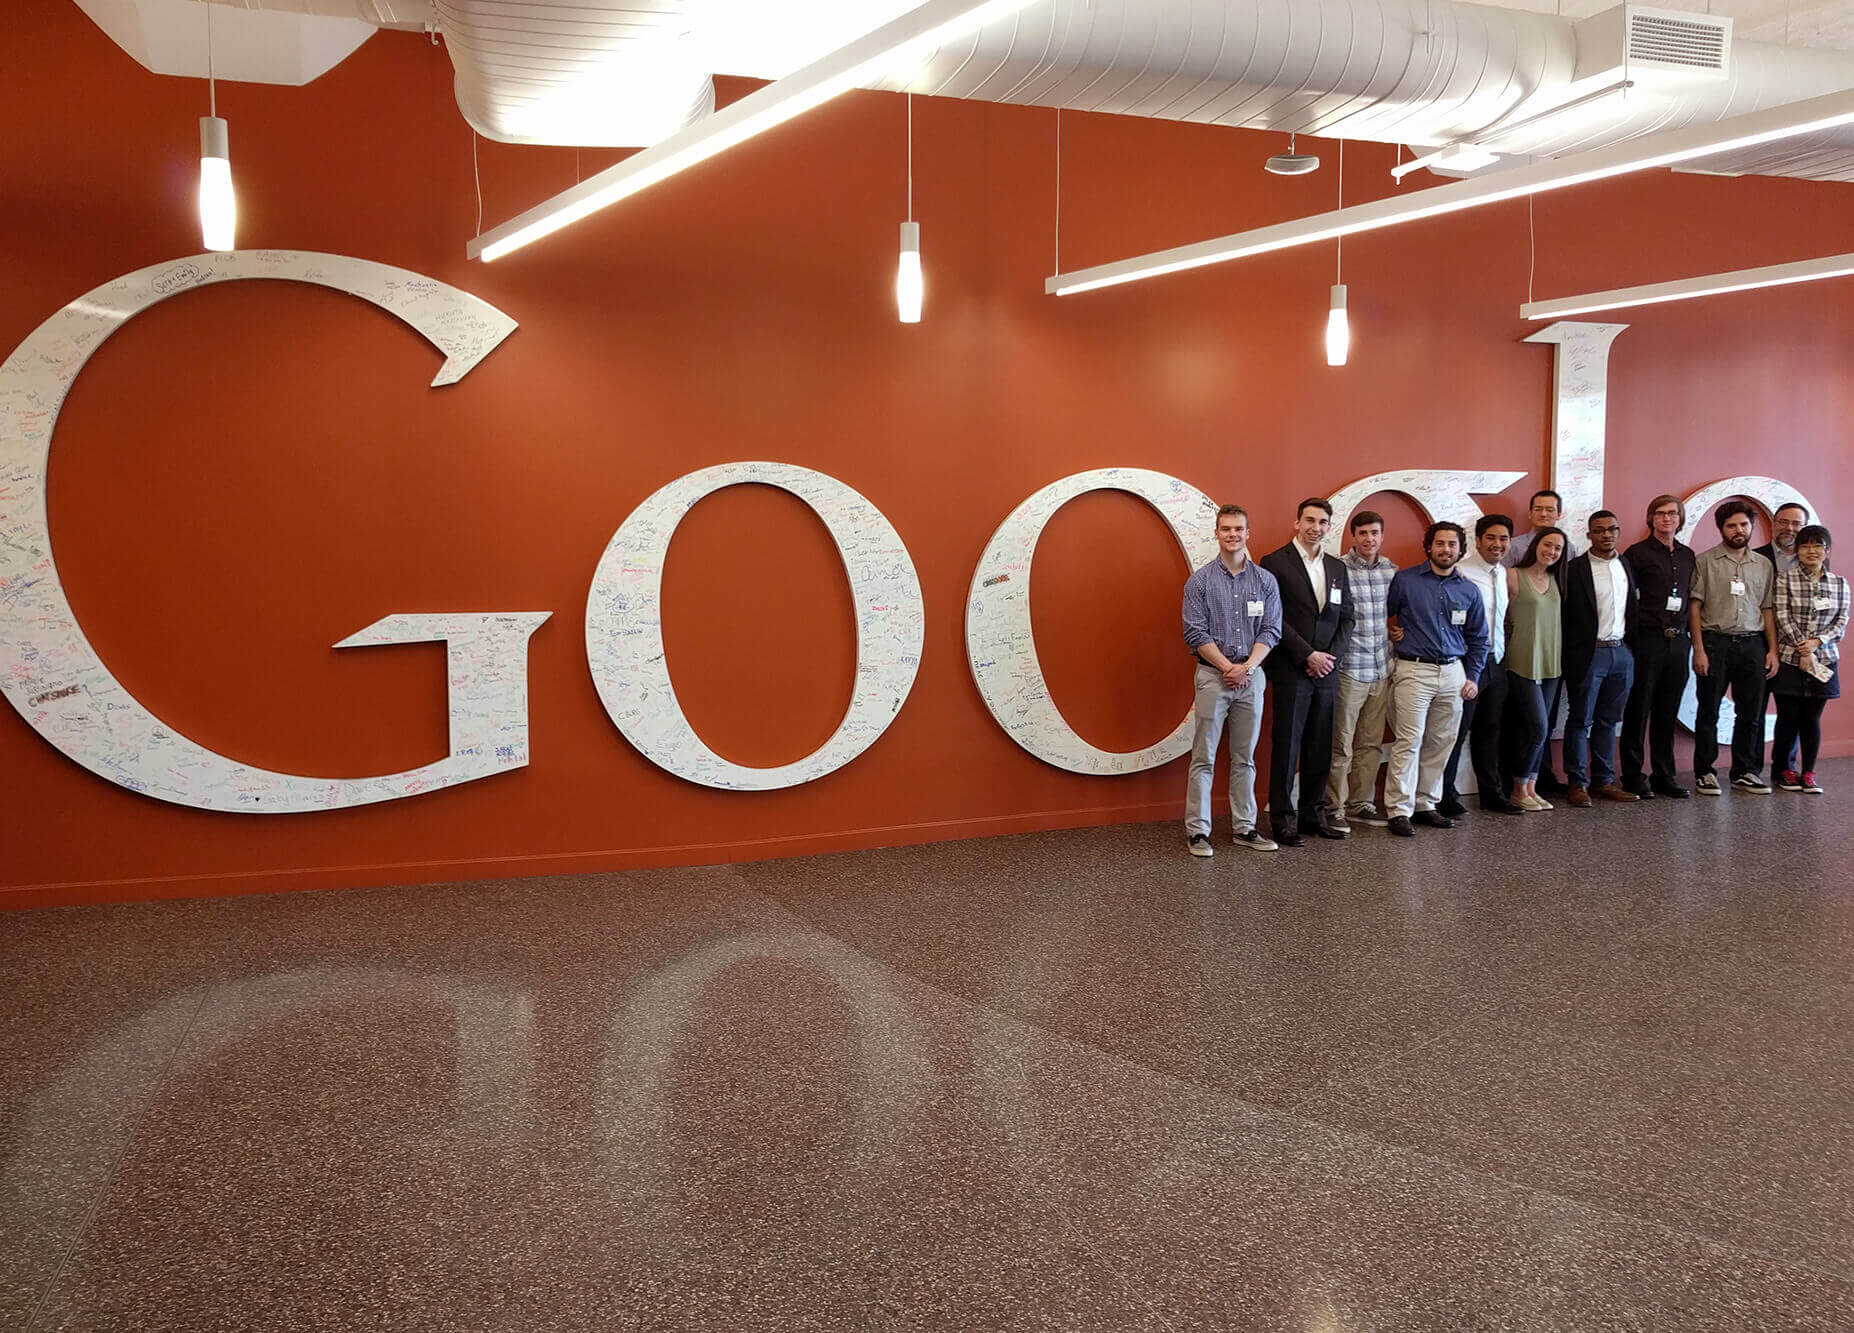 Amanda Kassay '10 leads a group of engineering students on a tour of Google's New York office, where she works as a senior creative engineer.